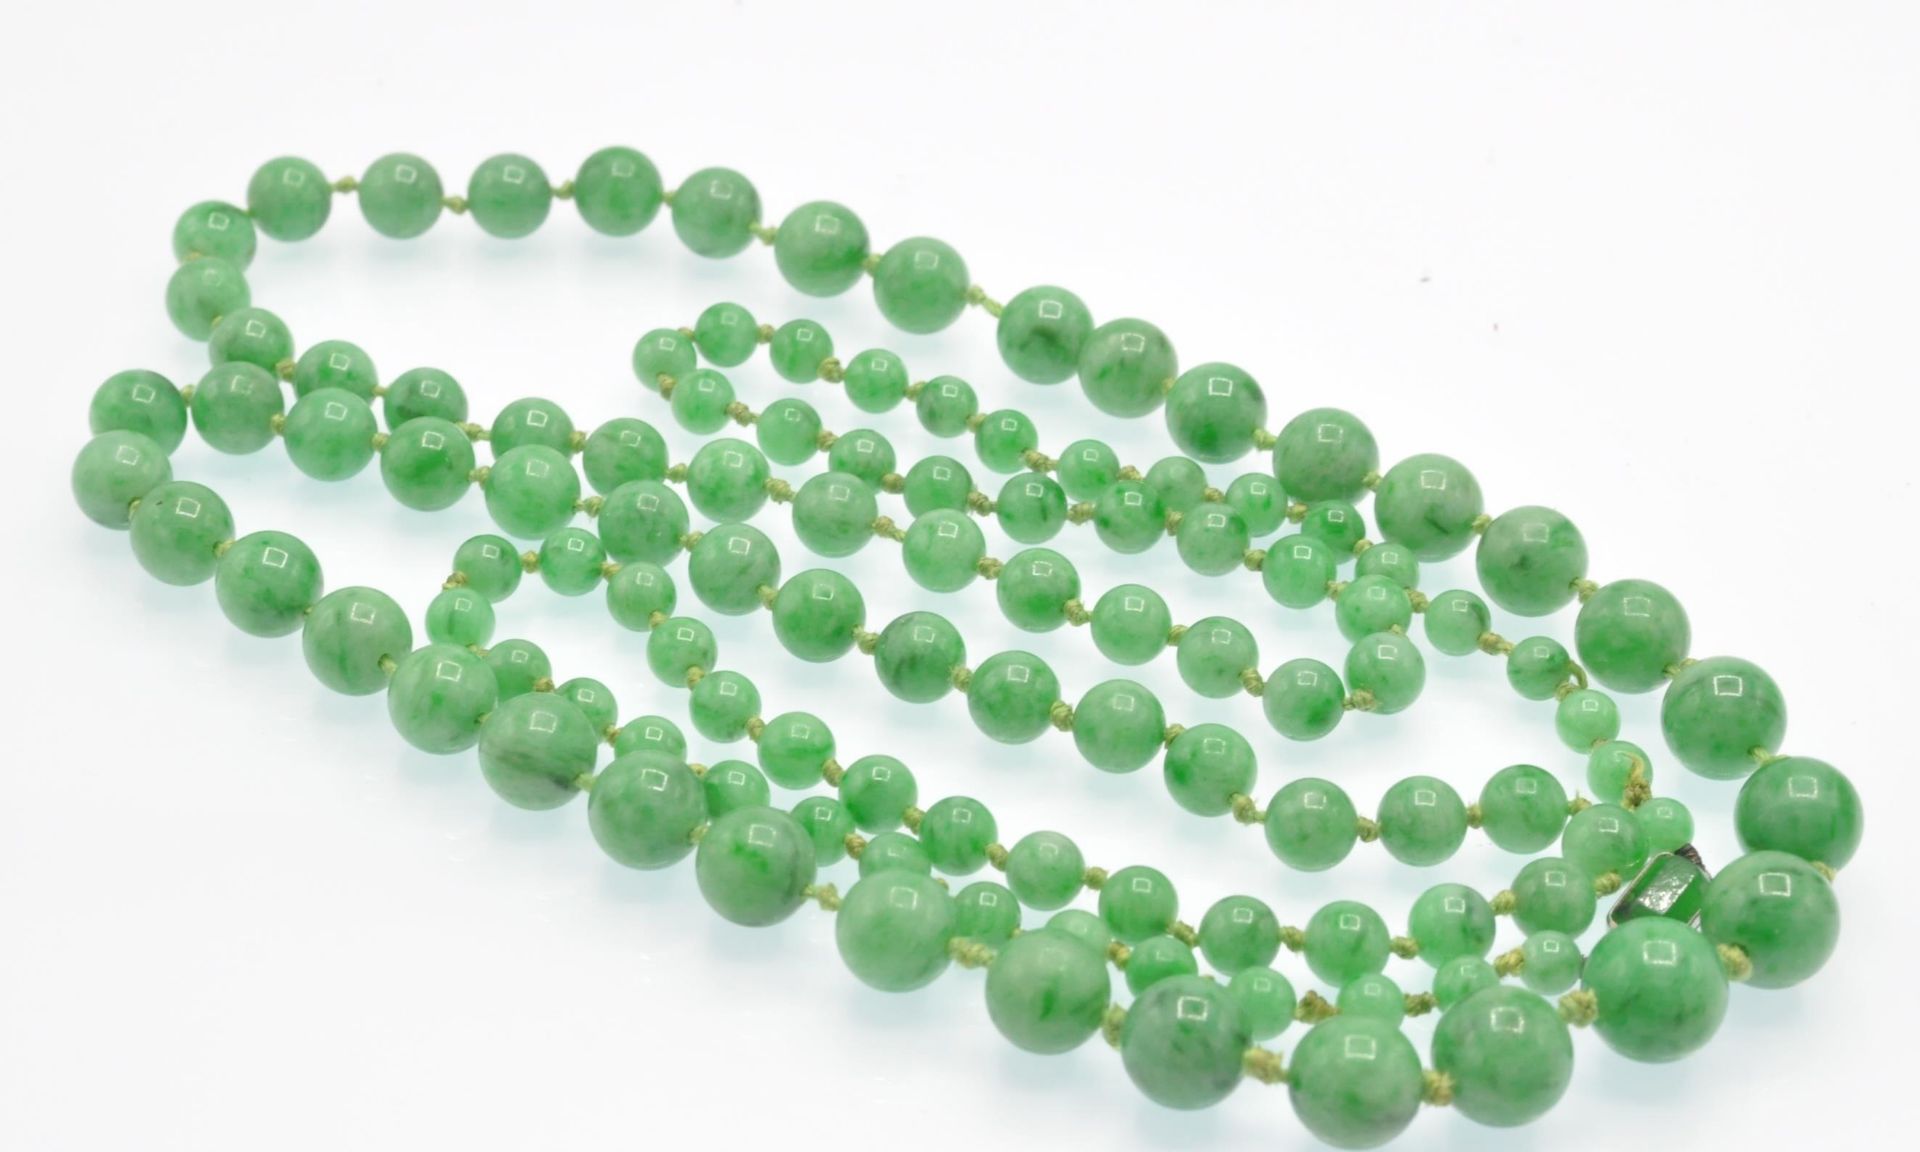 An Antique Jade Bead Necklace - Image 4 of 6